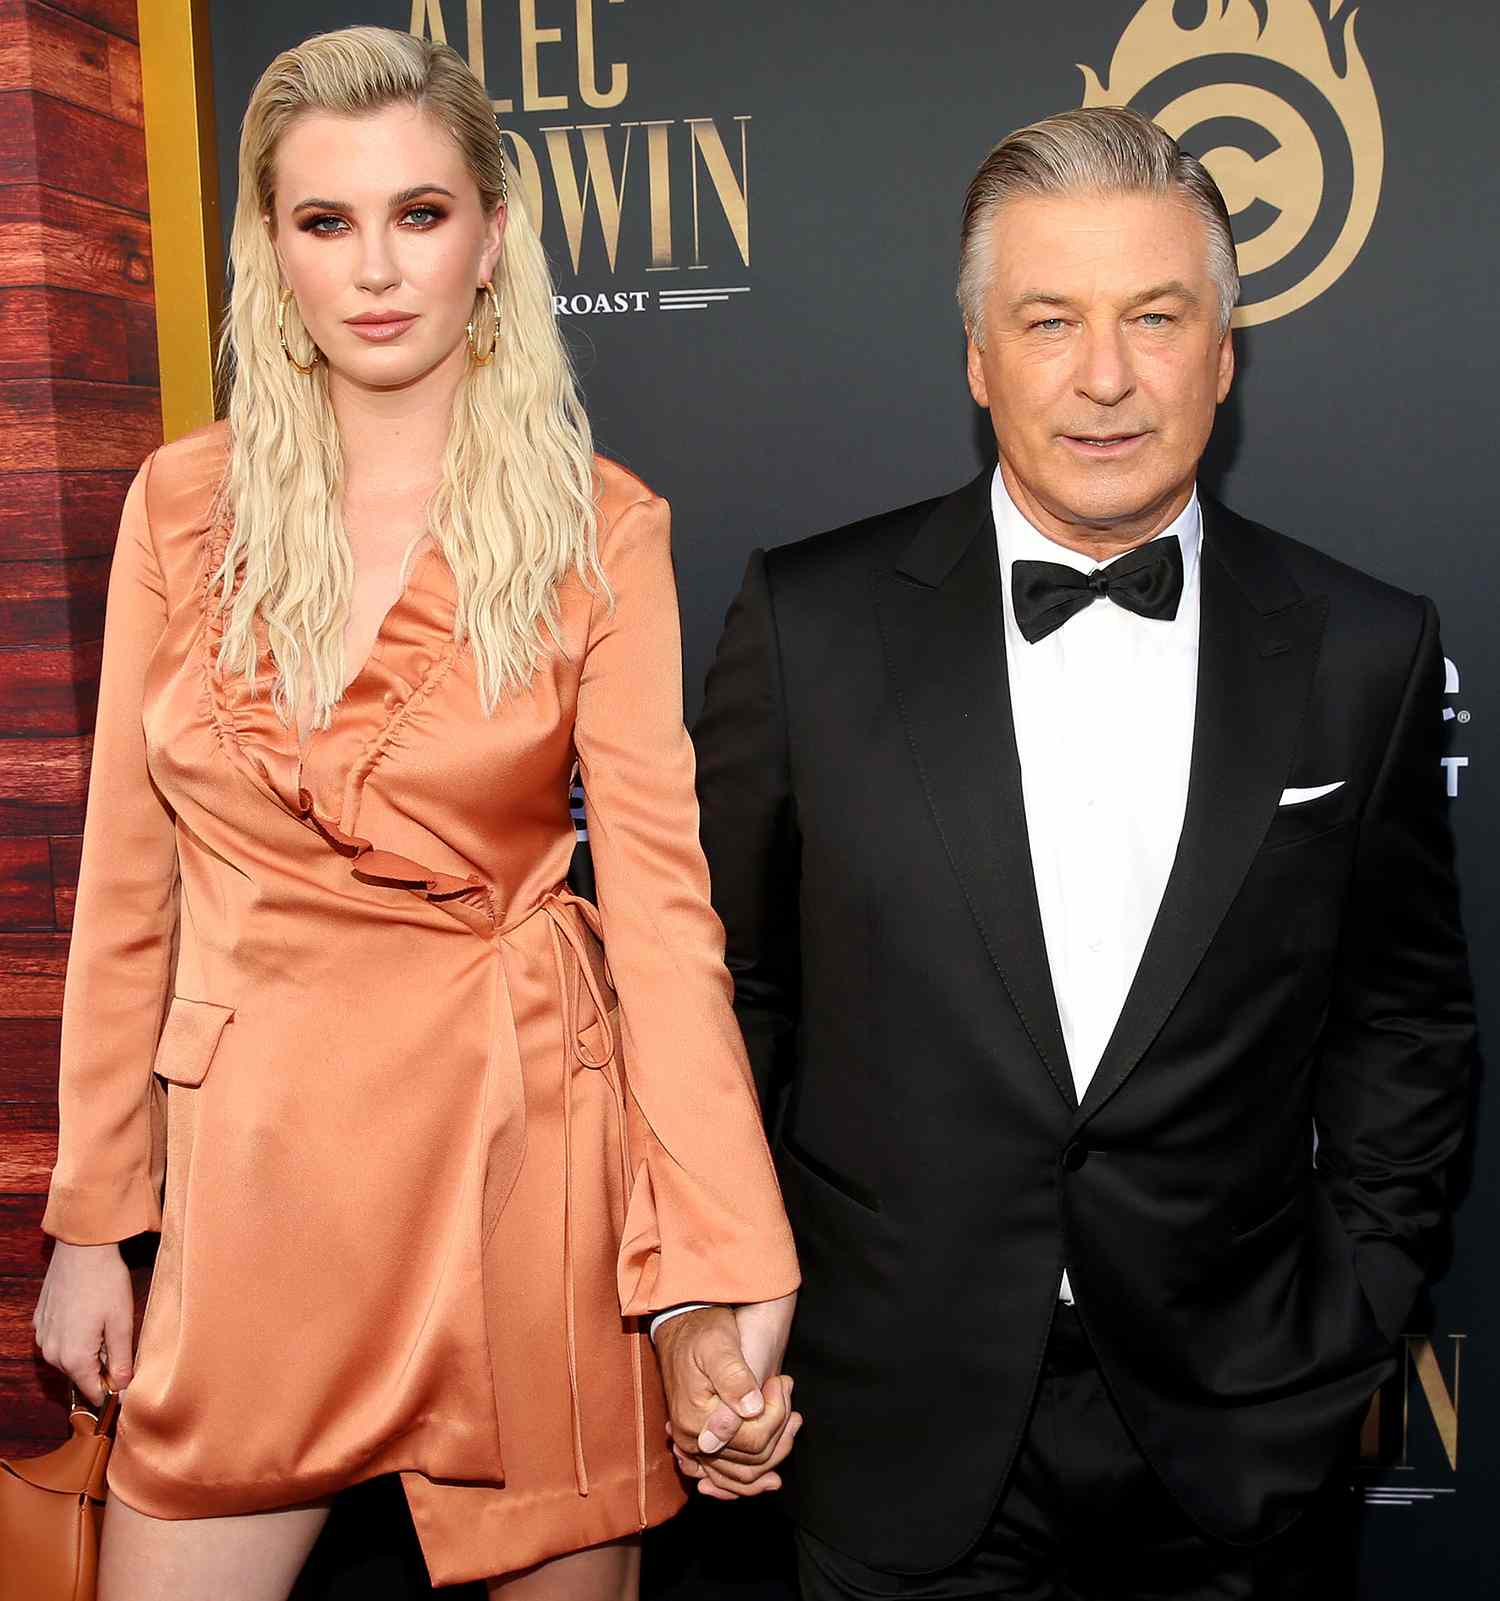 Ireland Baldwin Praises Sweet Fan Message About Alec Baldwin After Rust Shooting: 'I Know My Dad'